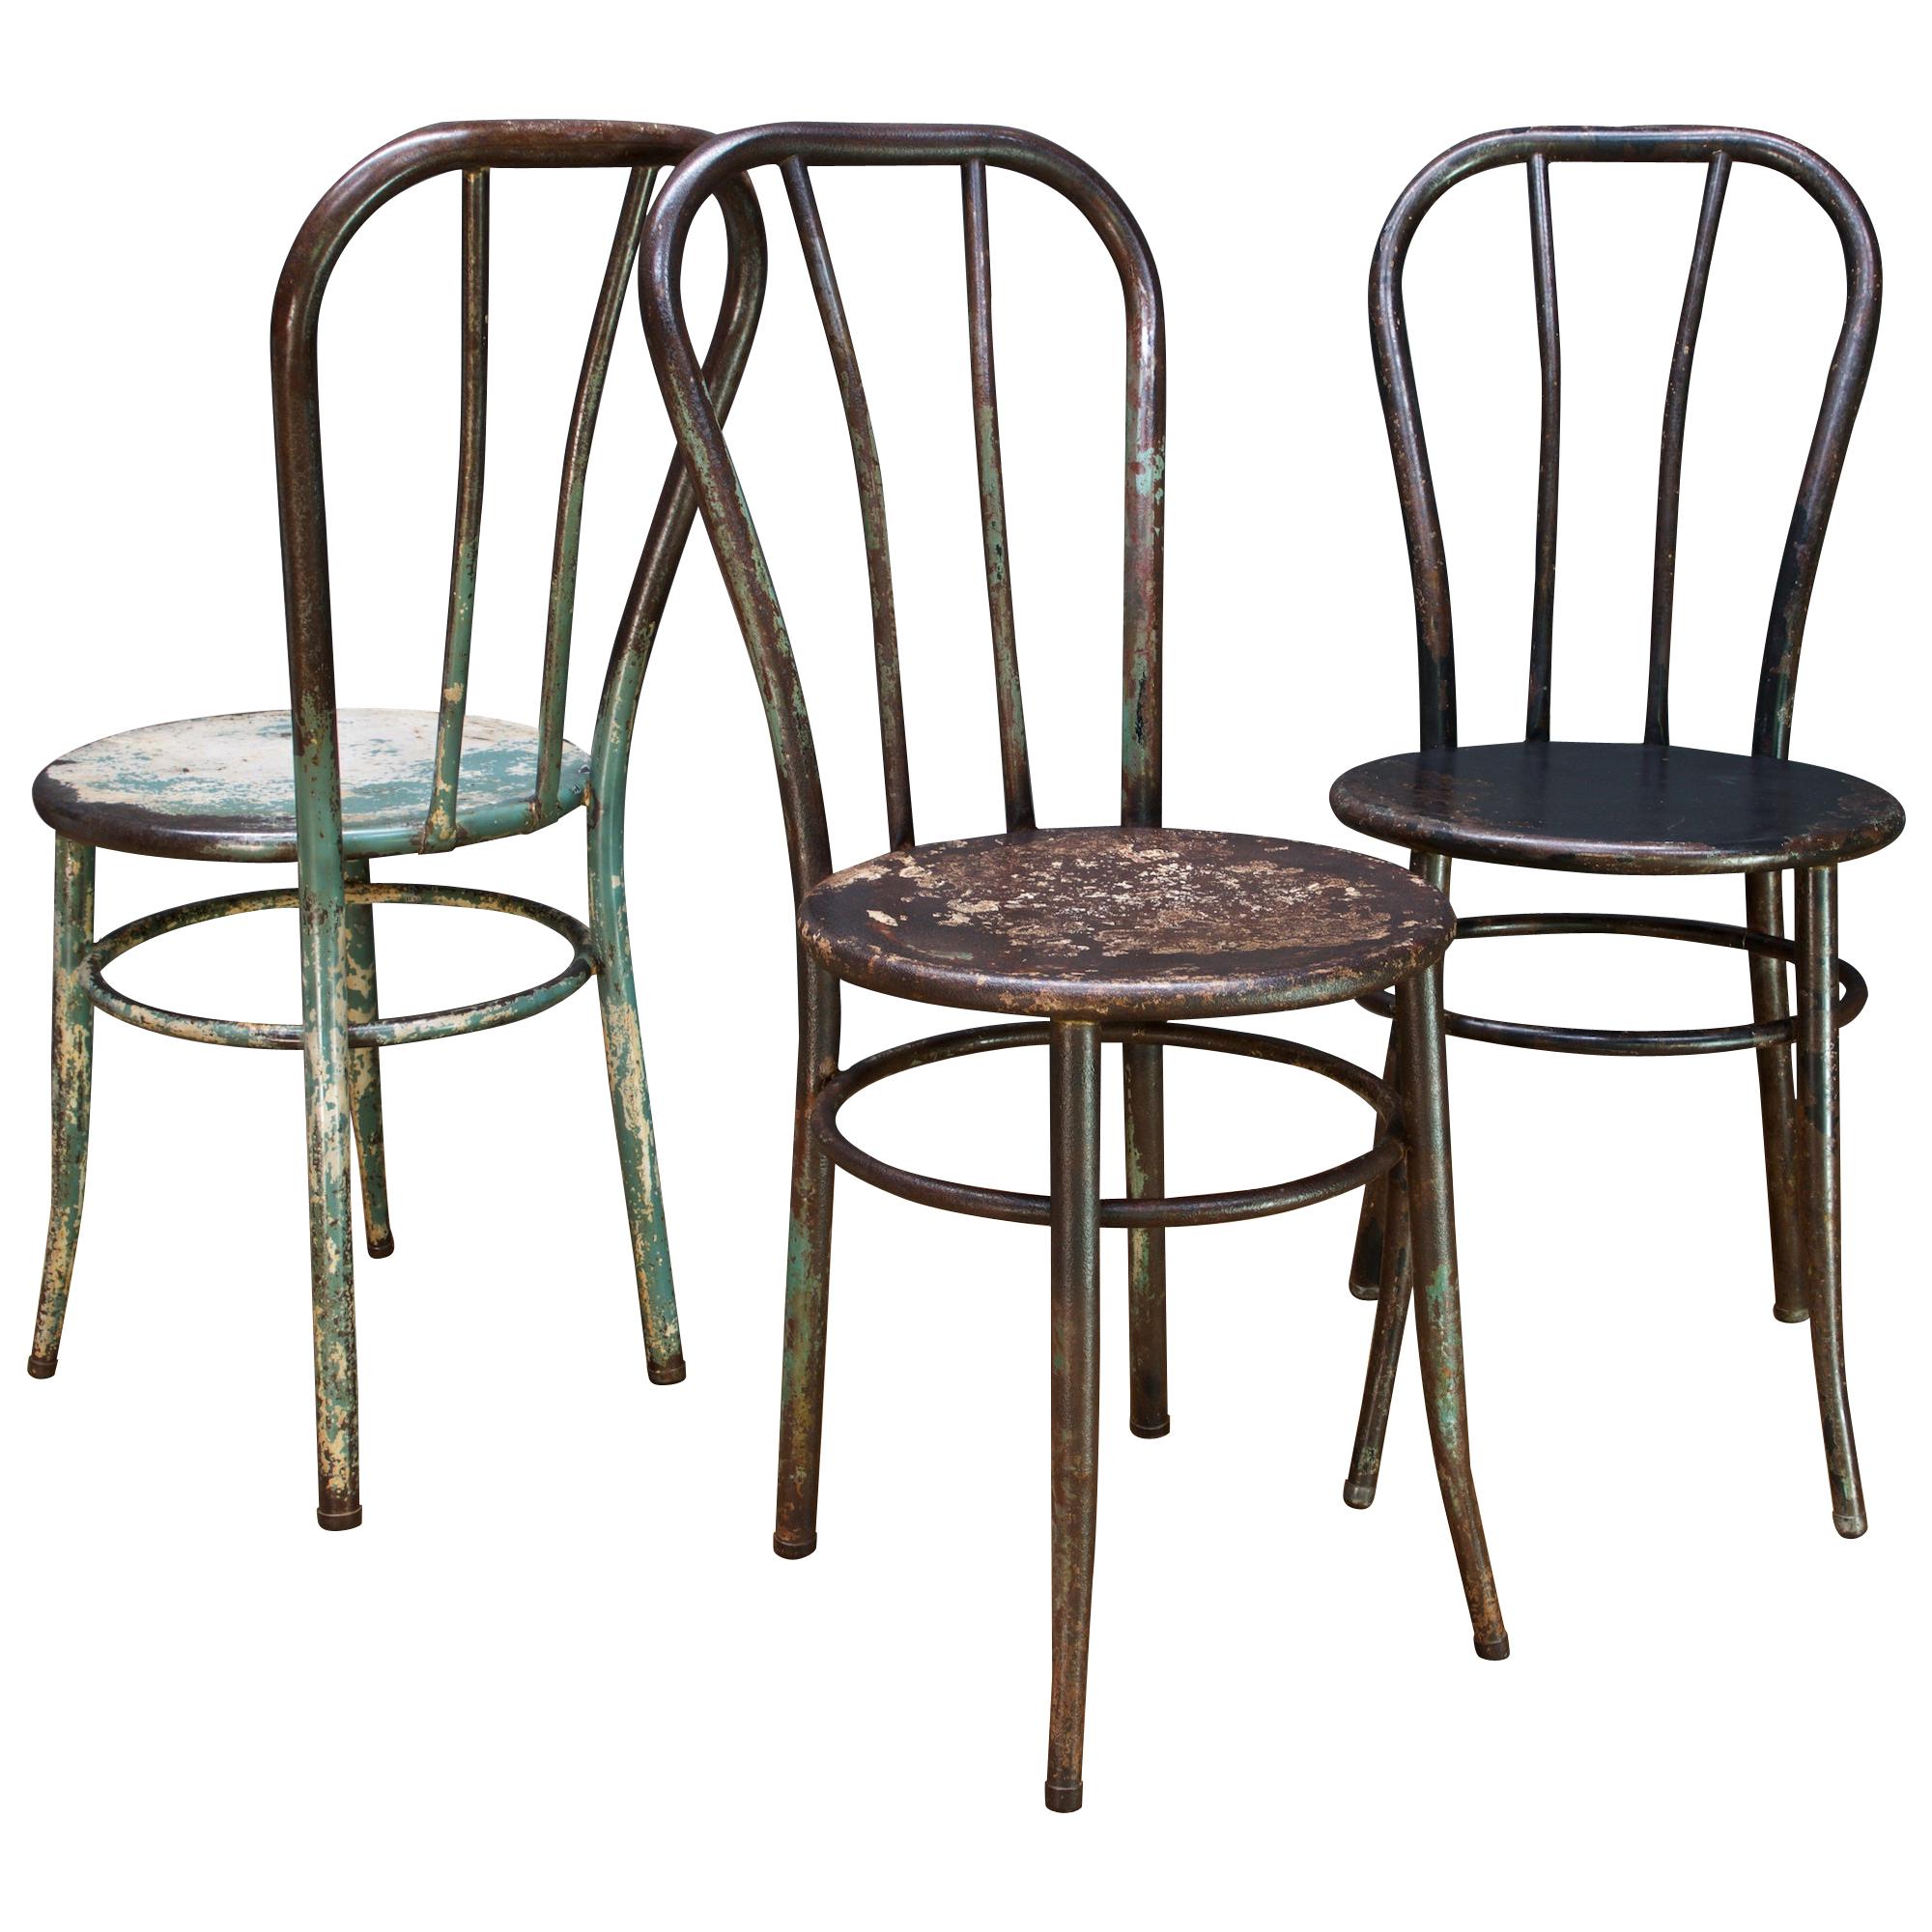 3 Vintage Industrial American Steel NYC Bar Chairs Bistro Boutique like Thonet 